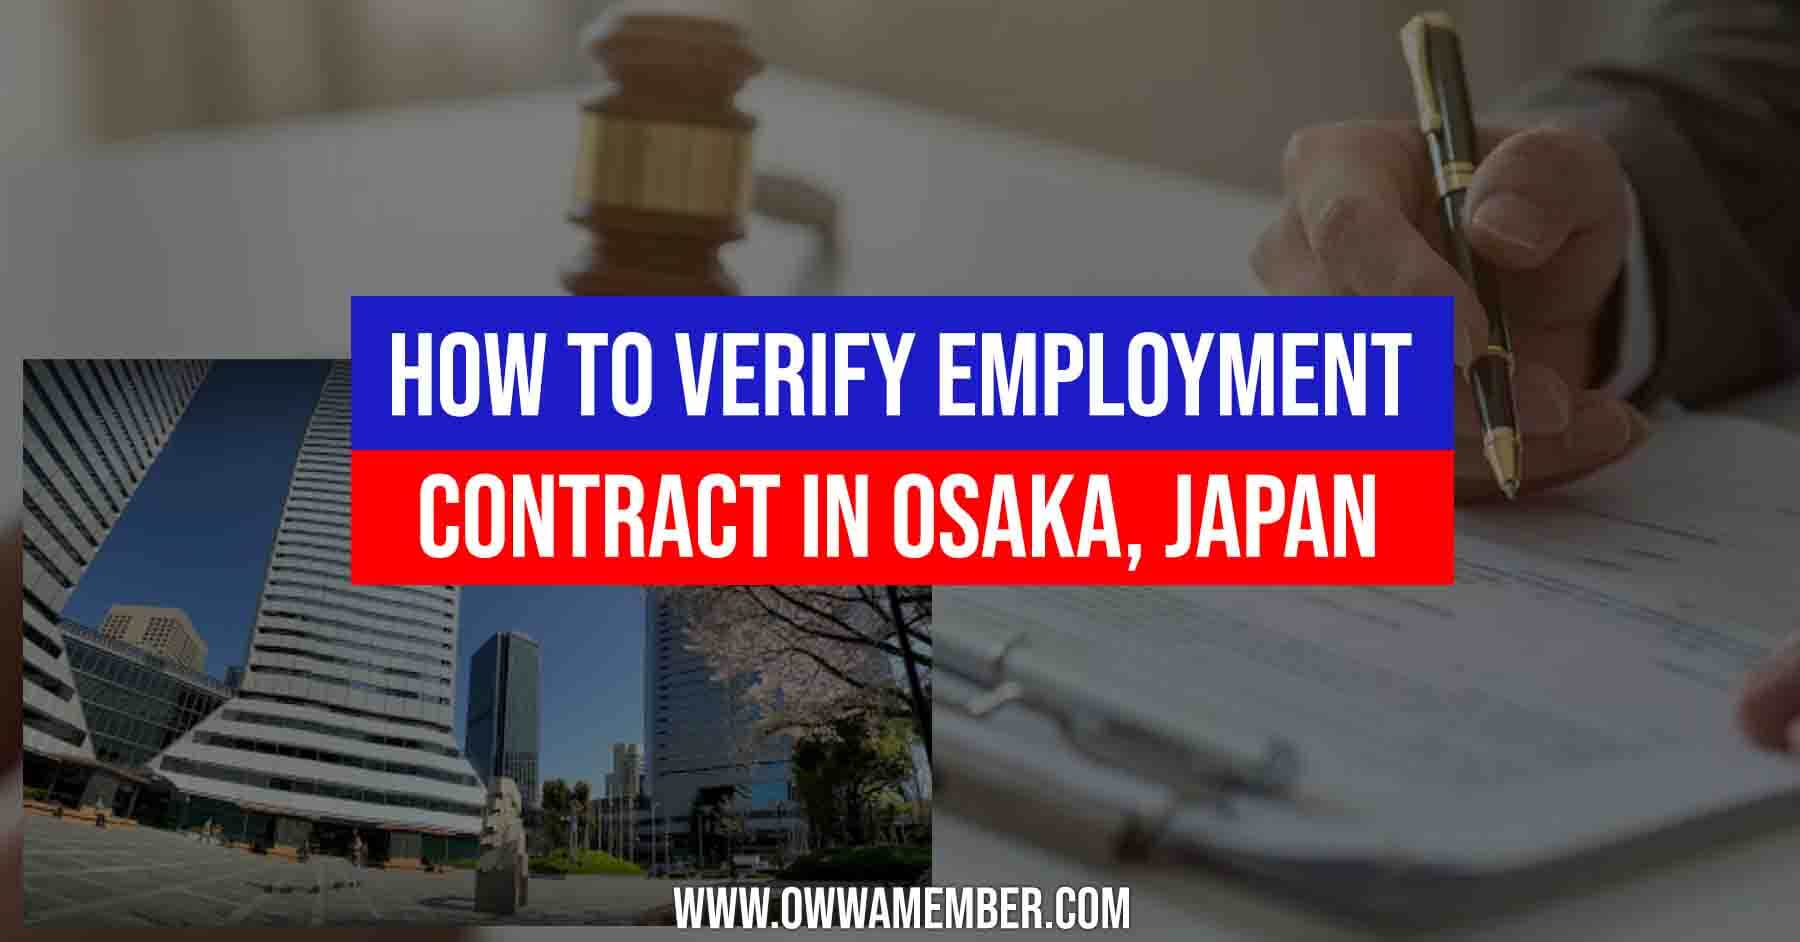 employment contract verification in osaka japan